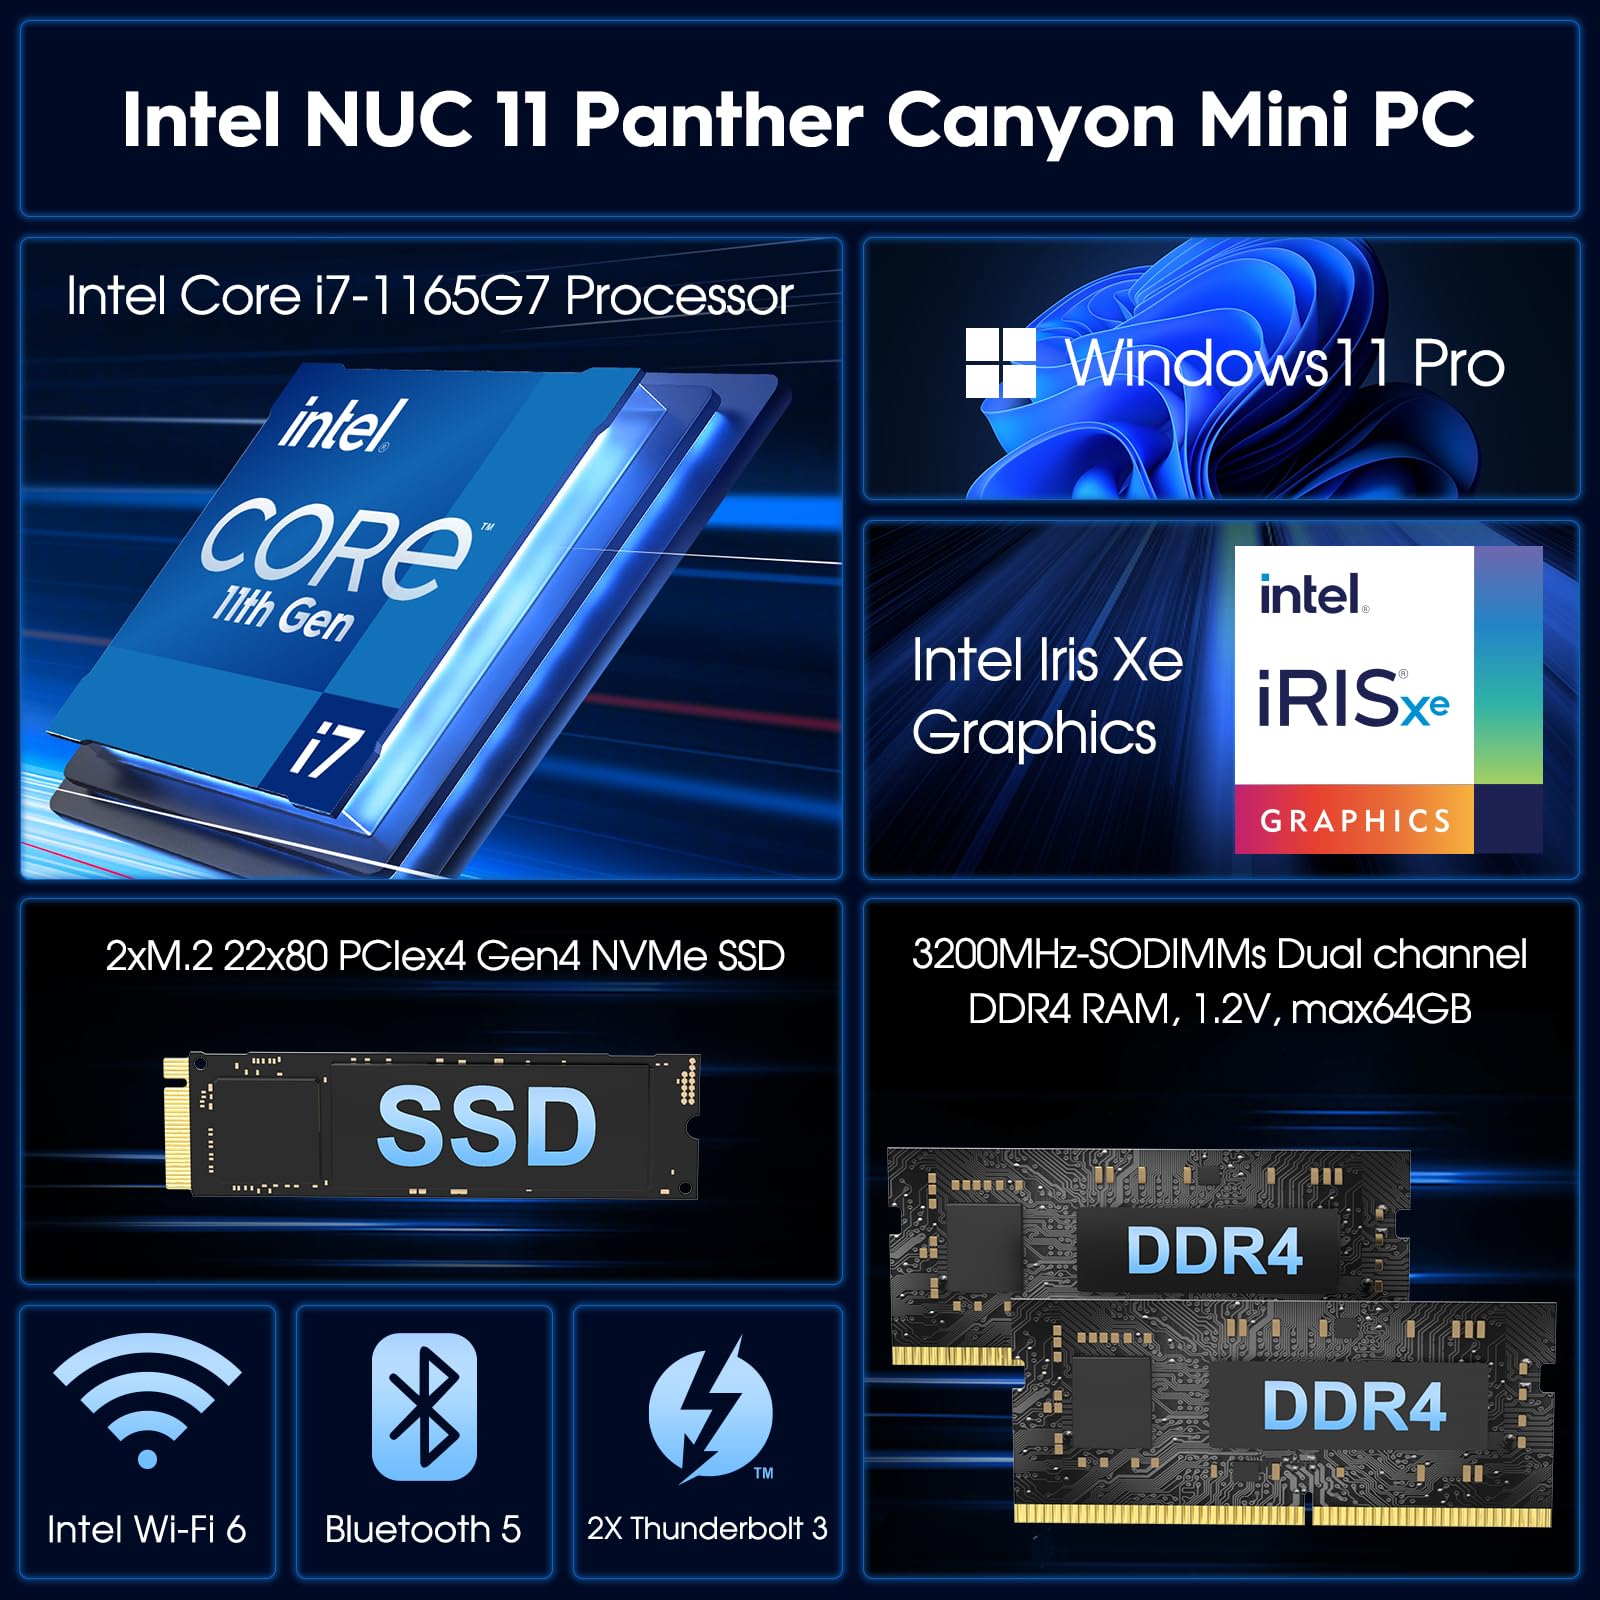 Intel NUC 11, Panther Canyon Mini Pc with 11th Gen Core i7-1165G7 (4C/8T/12MB Cache/28W & Up to 4.7GHz), 16GB DDR4 RAM & 512GB NVMe SSD, Support 8K /WiFi6E /BT5.0/2 x Thunderbolt 3, Windows 11 Pro